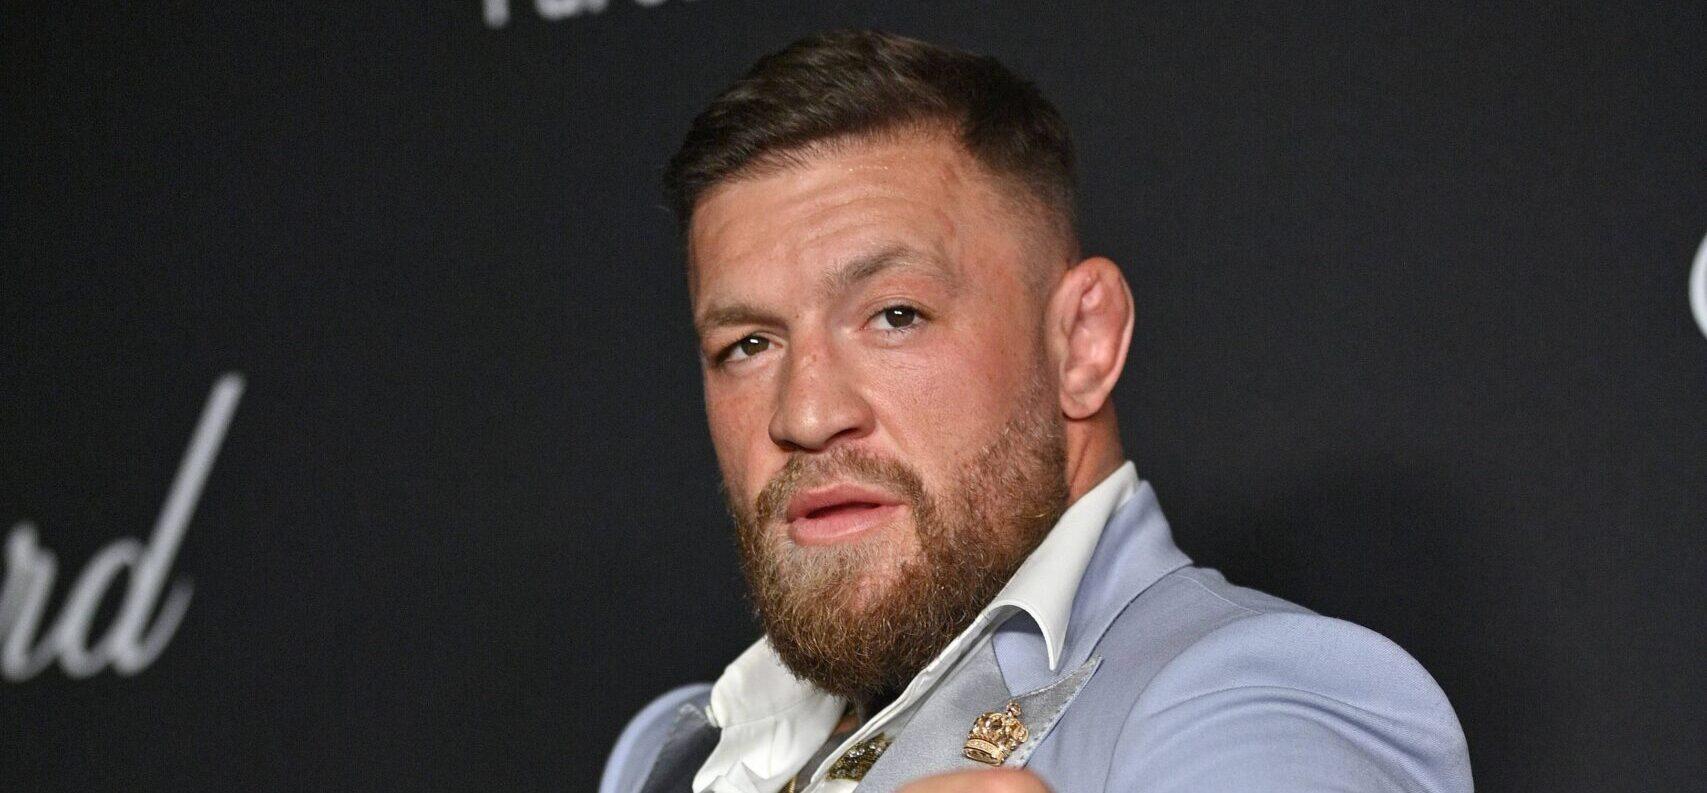 Conor McGregor ‘Pleased’ After Being Cleared Of Sexual Assault Charges